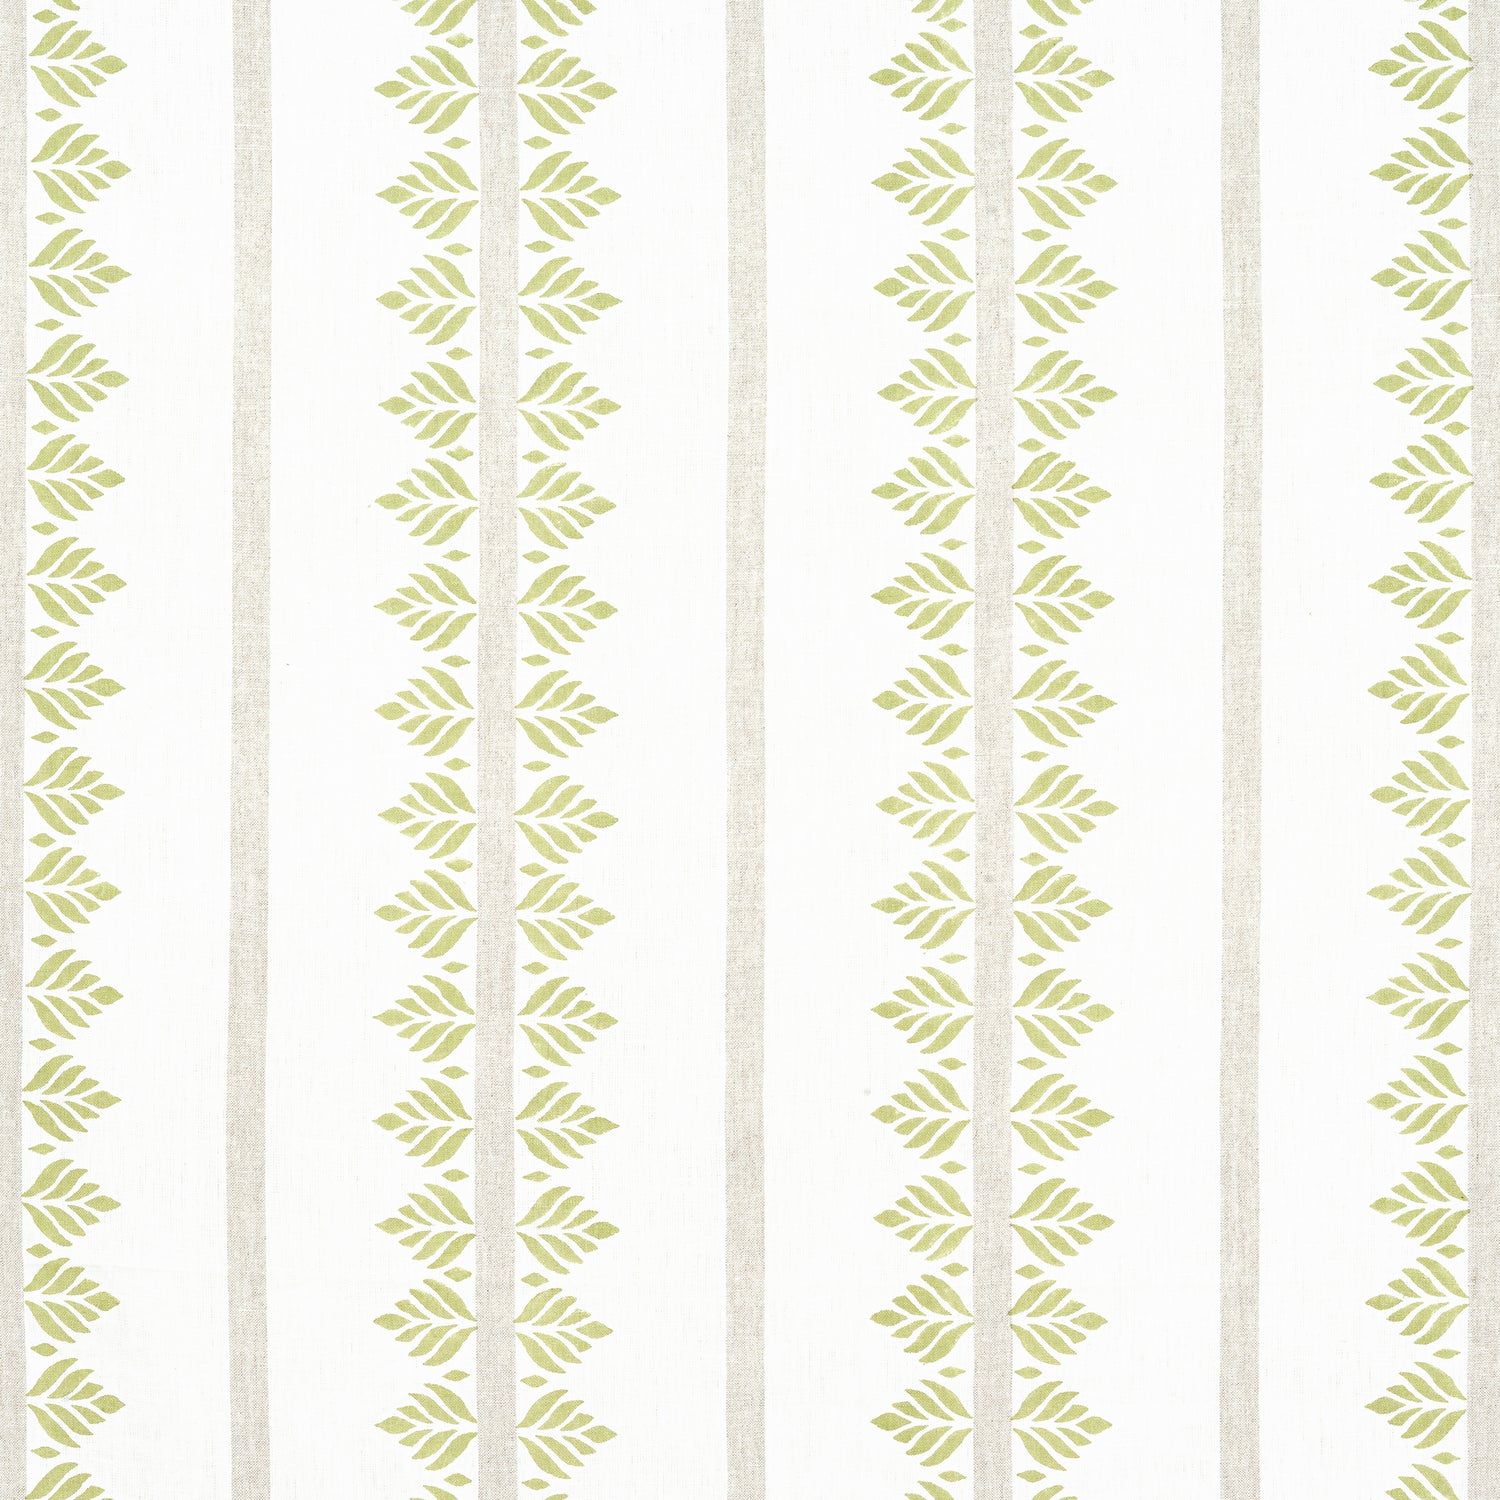 Fern Stripe fabric in green color - pattern number AF15102 - by Anna French in the Antilles collection